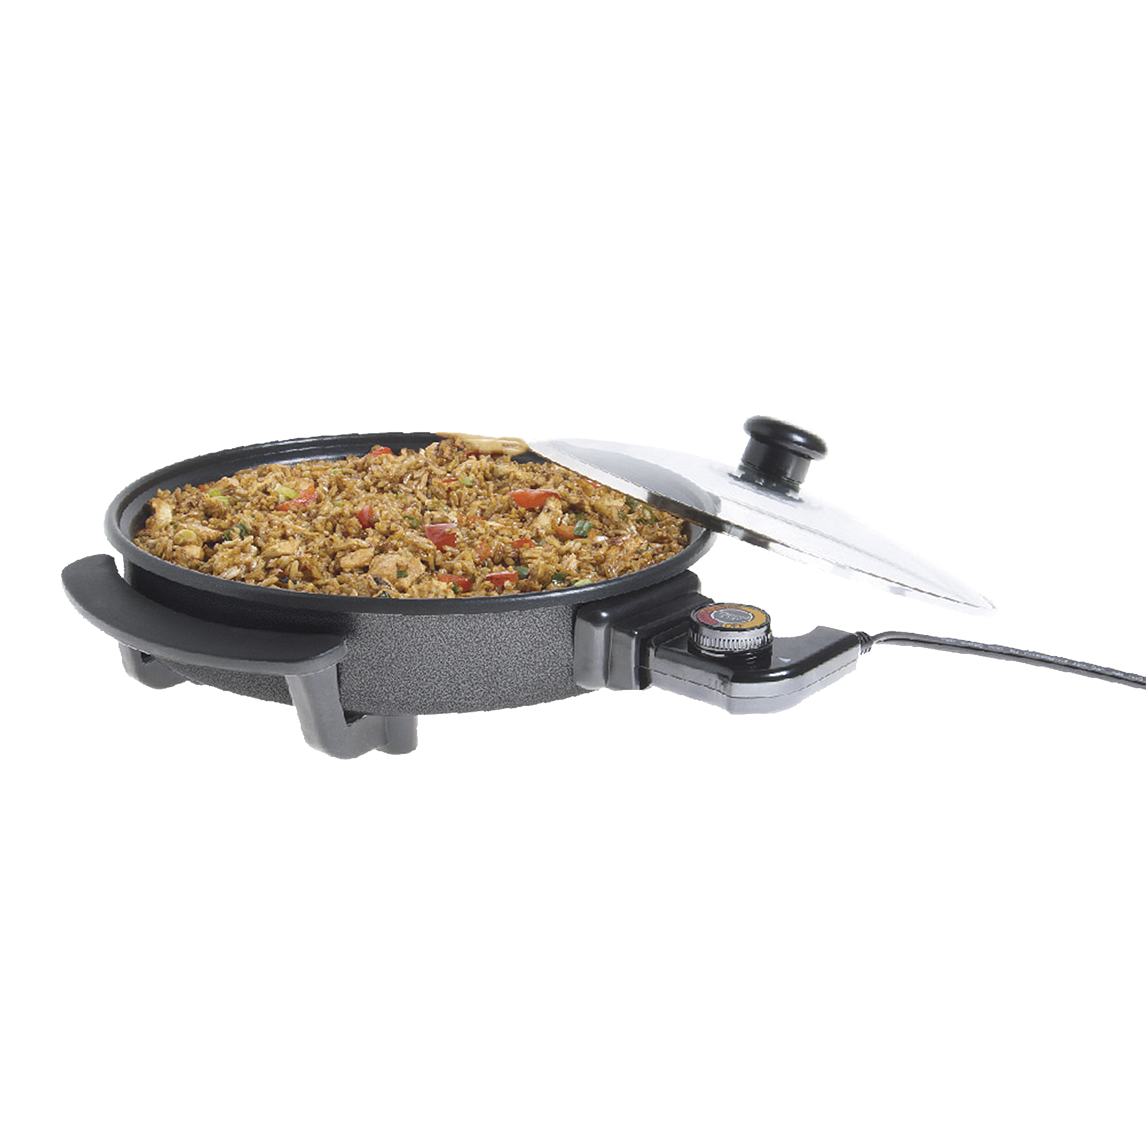 Premium - 1400W 11 Inch Rounded Electric Skillet Non-Stick Coating Glass lid